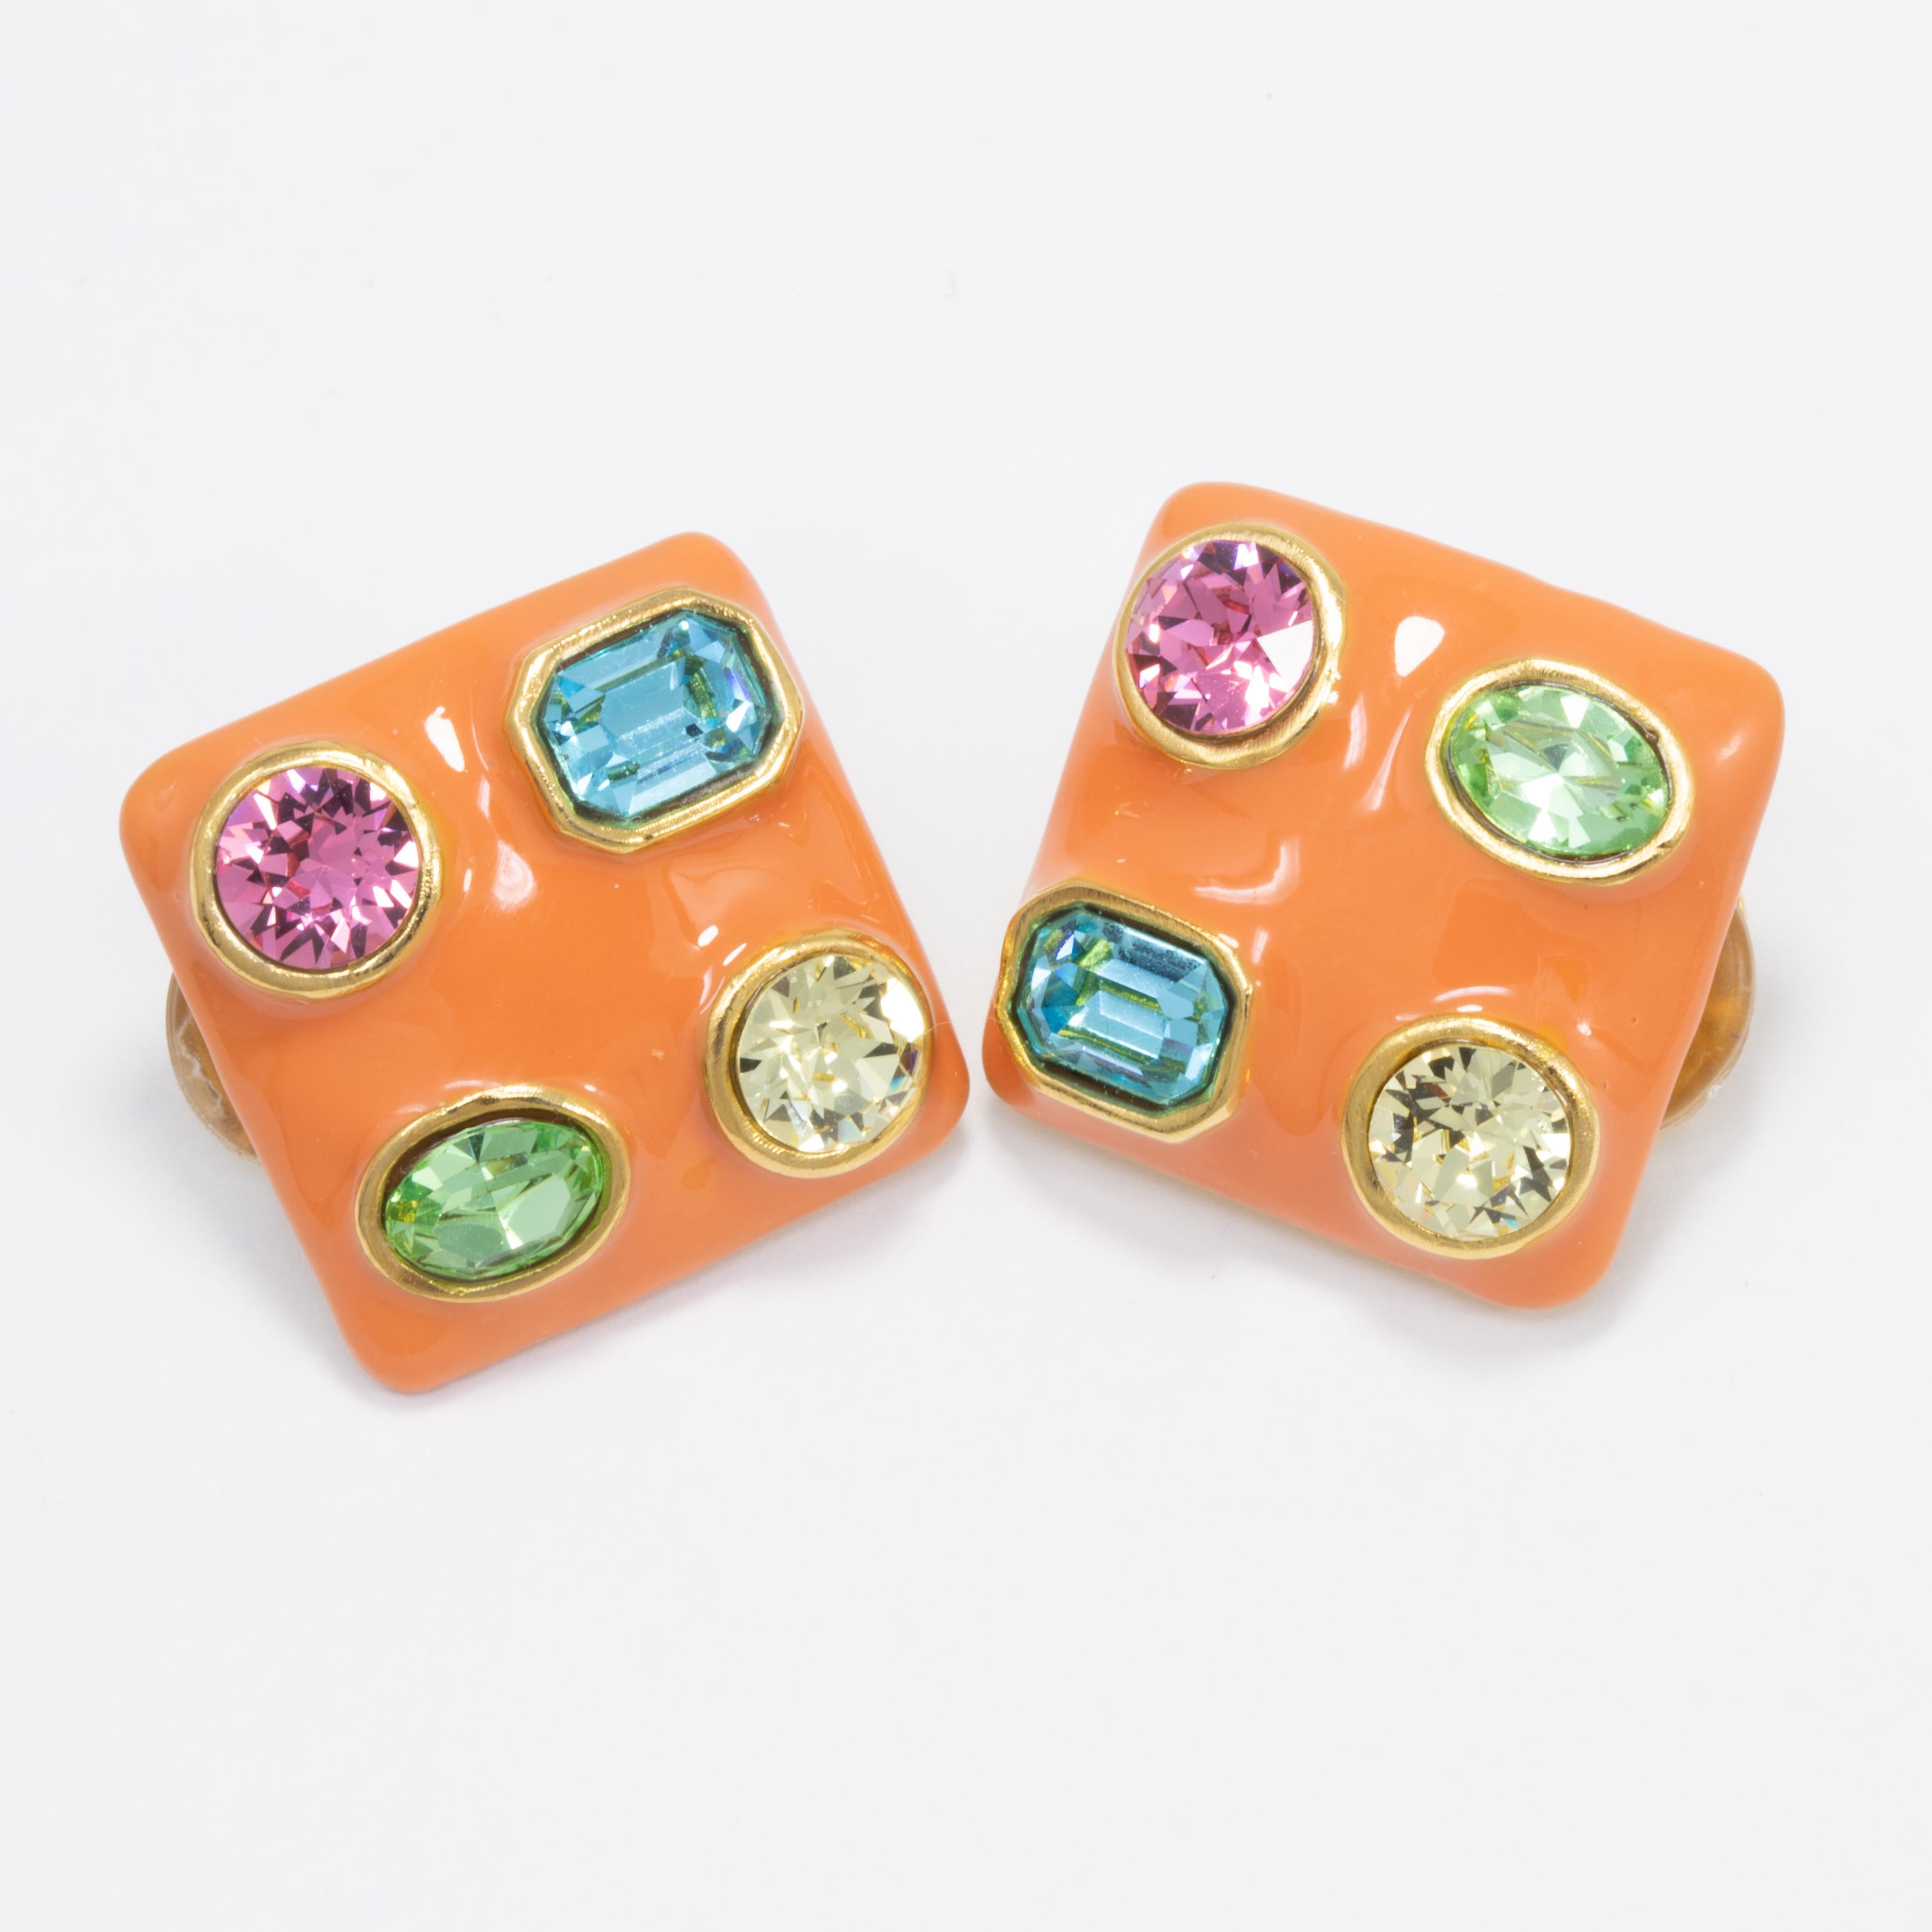 A pair of clip on earrings by Kenneth Jay Lane. Each gold-plated earring is painted in coral orange enamel, and decorated with colorful crystals.

Crystals: Aquamarine, peridot, rose, topaz

Tags, Marks, Hallmarks: KJL, Made in USA